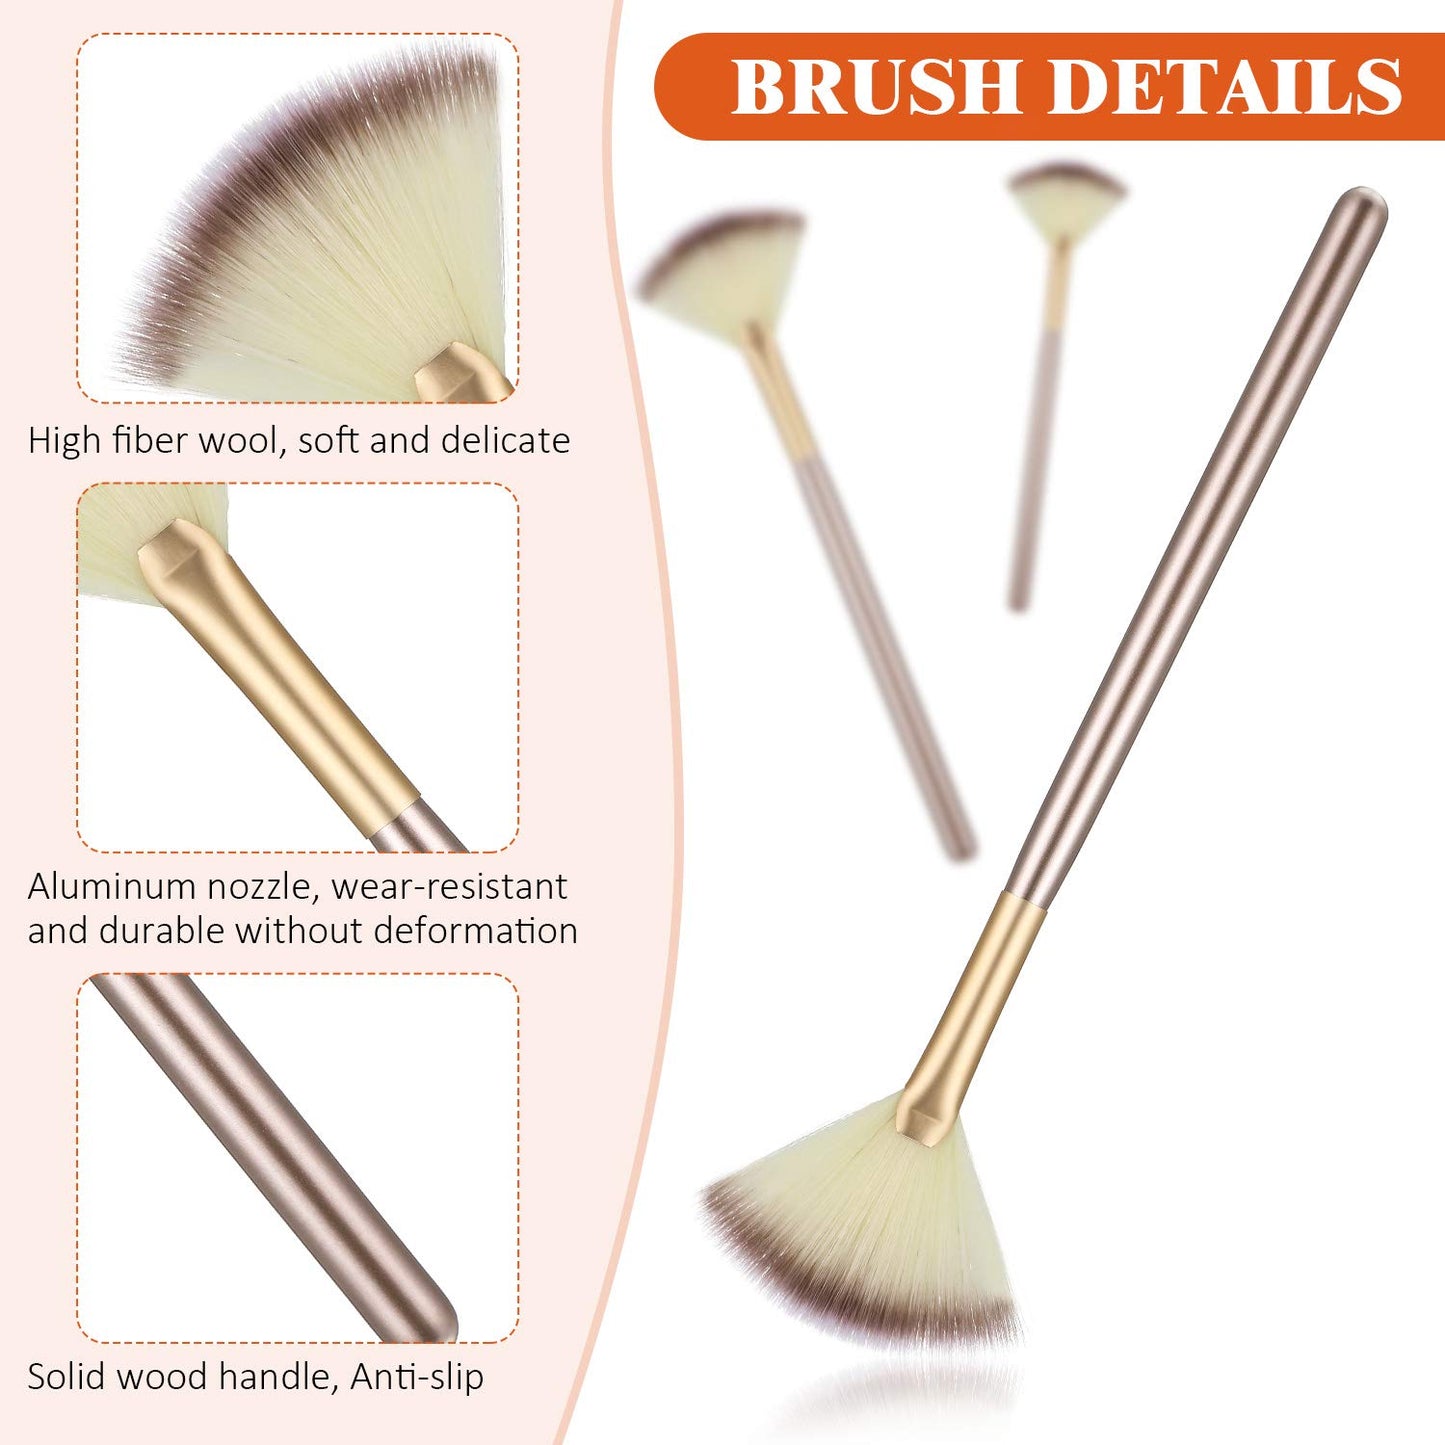 9 Pieces Facial Fan Mask Brushes, Soft Facial Applicator Brushes Tools for Peel Glycolic Makeup for Mud Cream (Champagne)